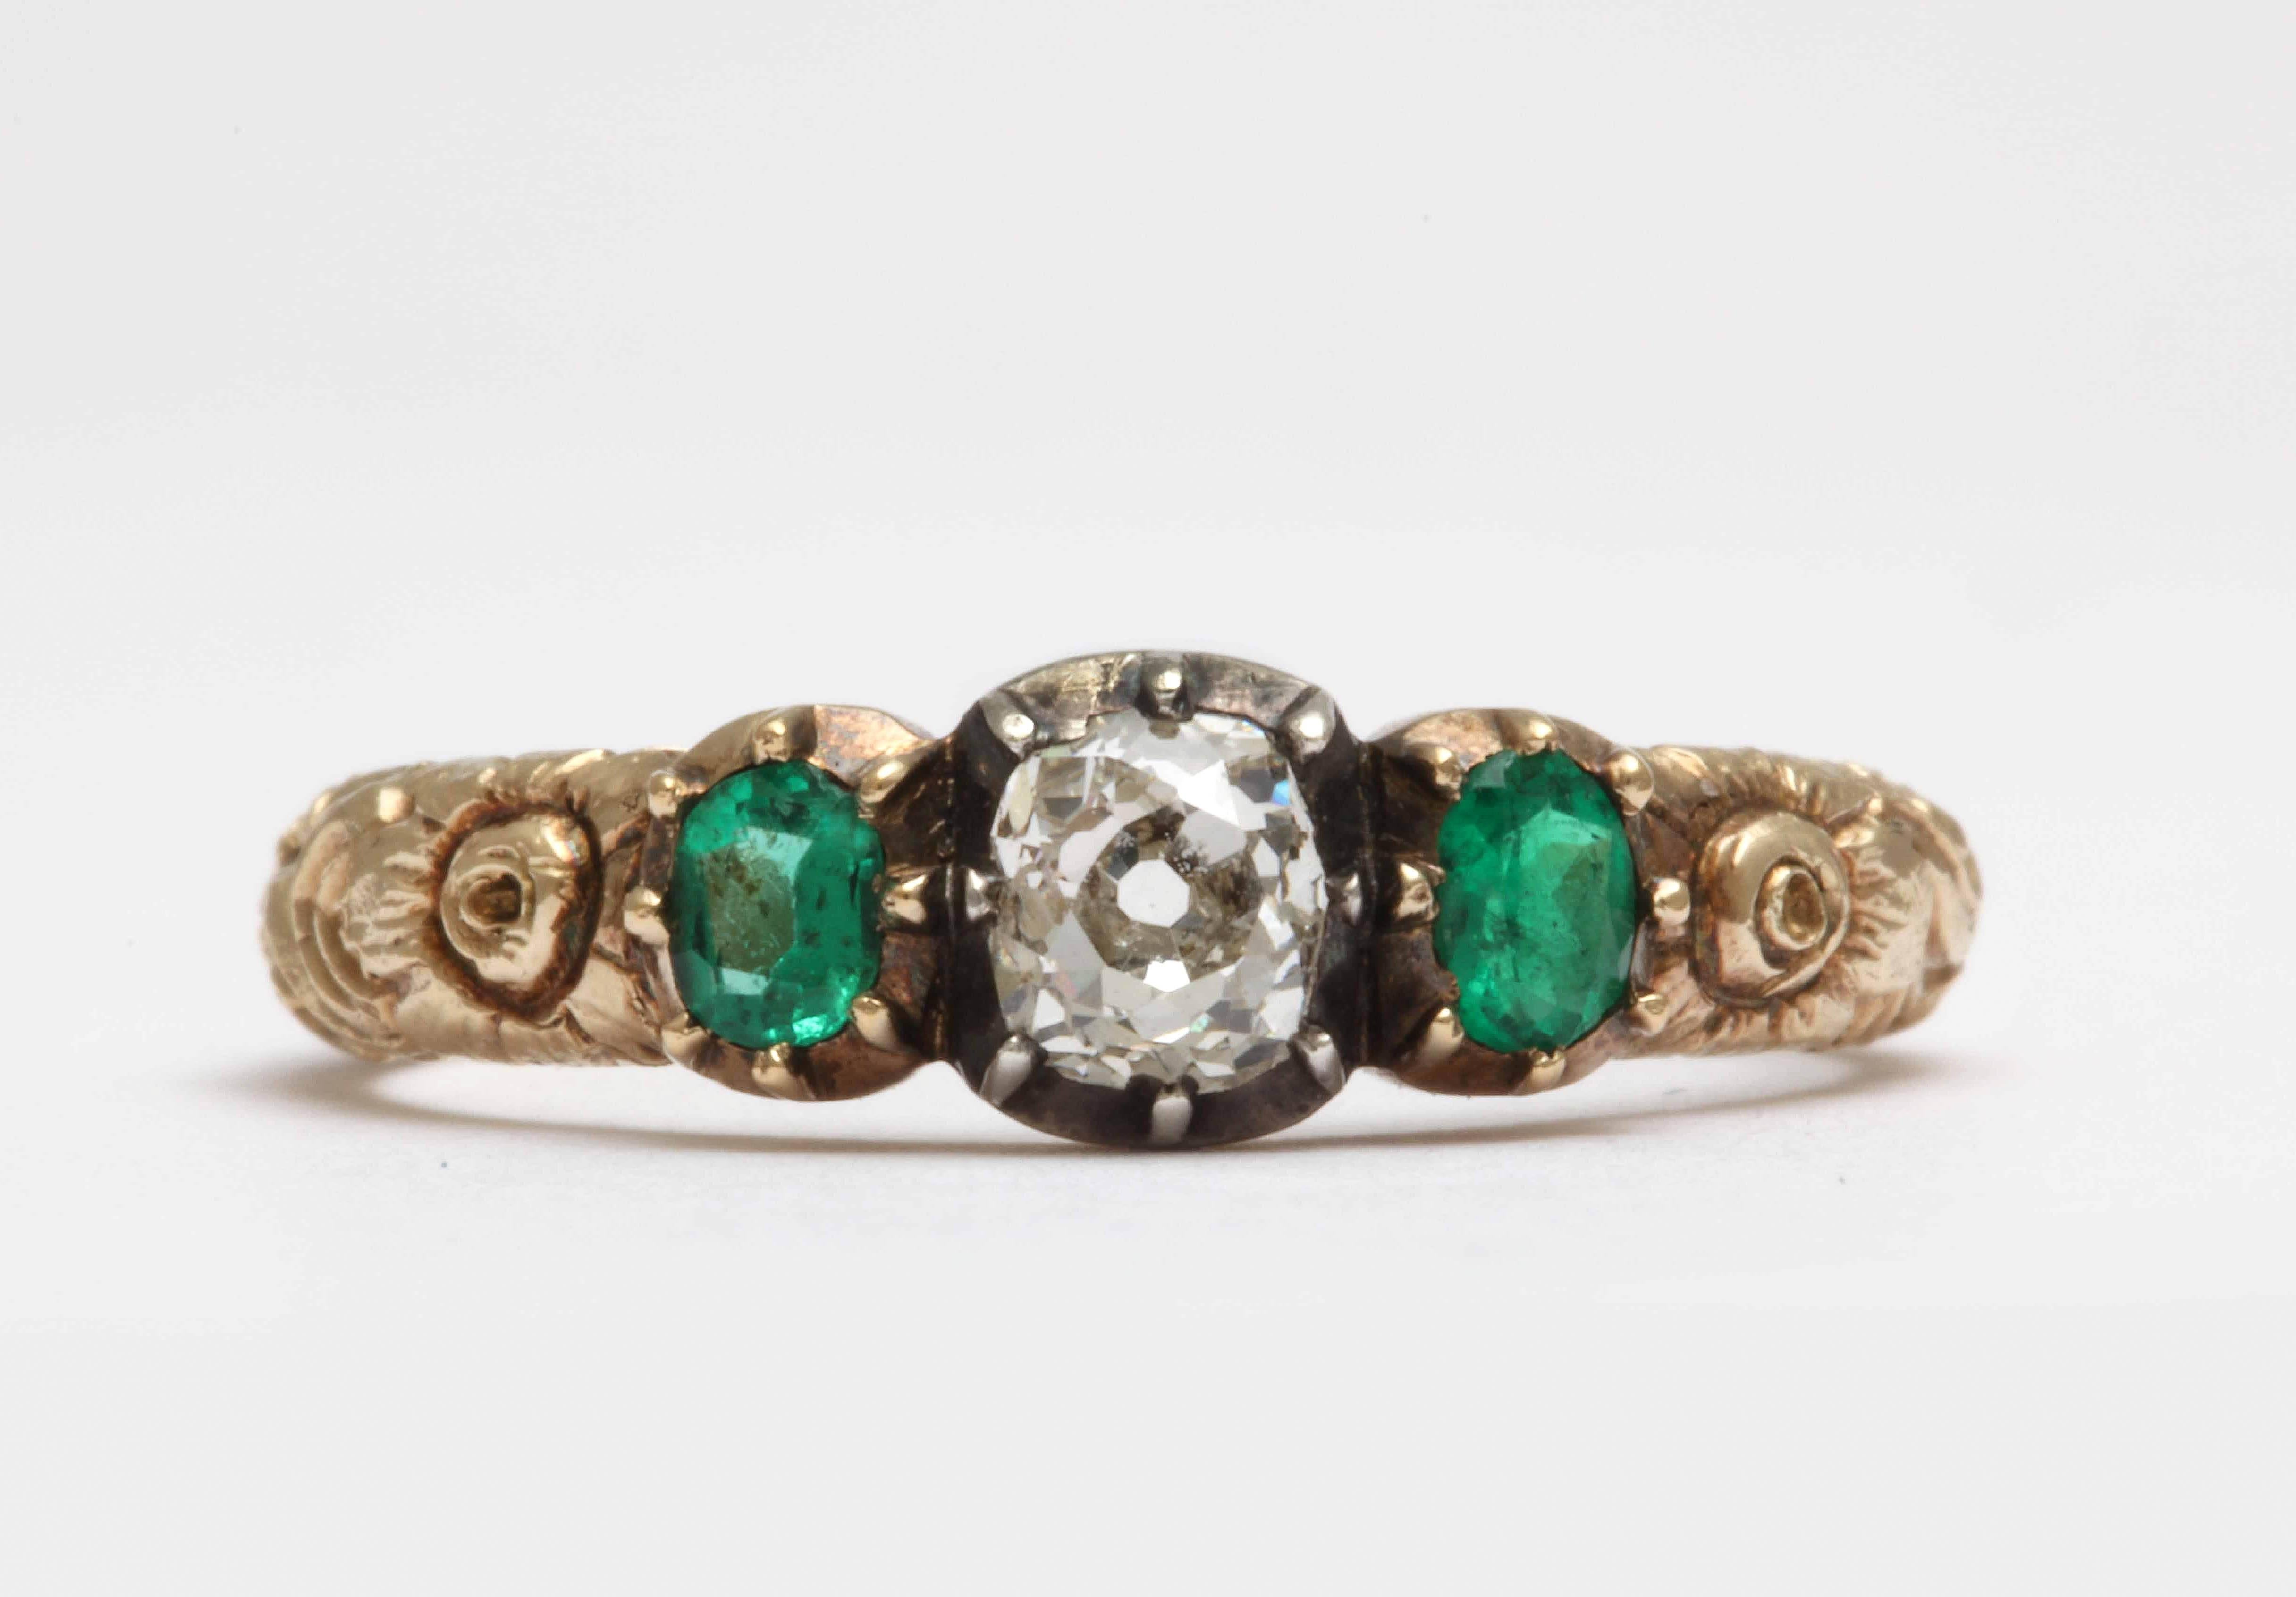 Made in the style of Georgian rings, but the stones are set with open backs. A central old mine cut diamonds is set in silver flanked by two emeralds set in yellow gold. The shank has beautiful deep floral engraving all the way around. 15kt-18kt